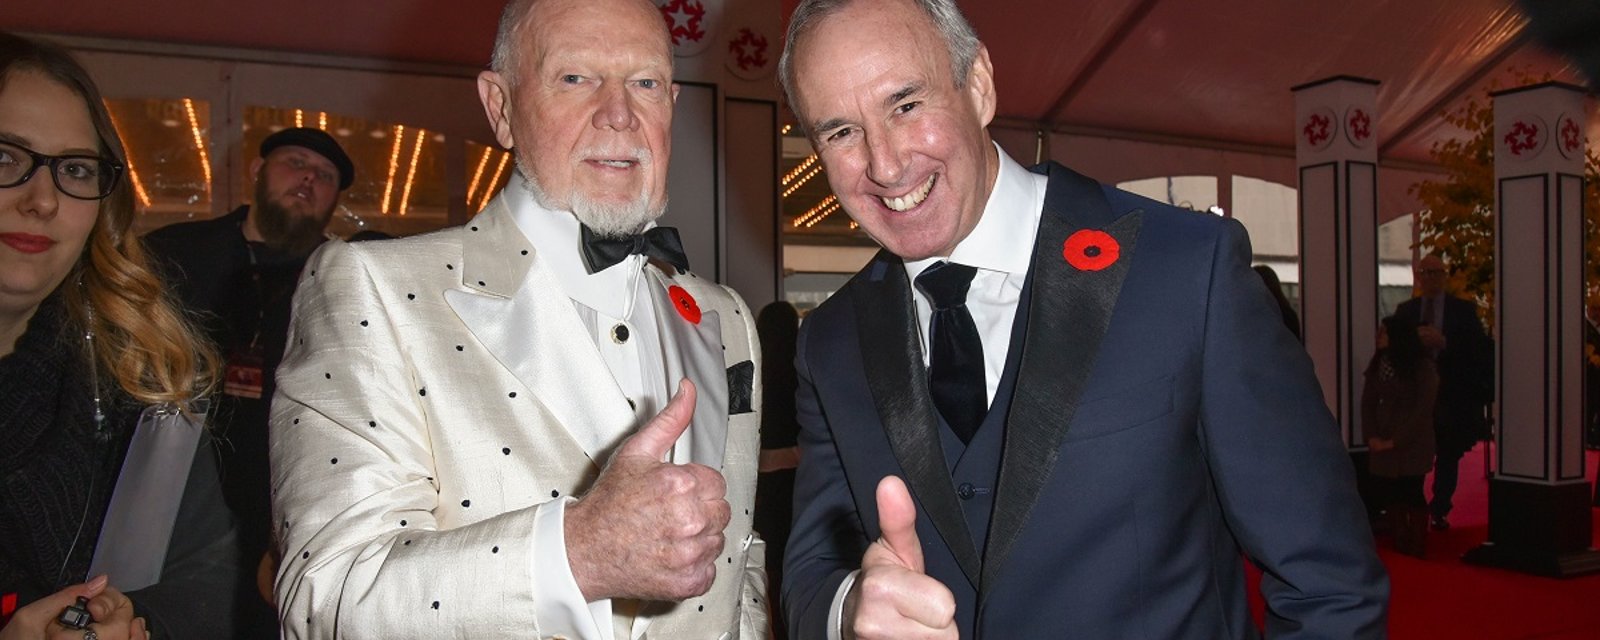 Ron MacLean responds to rumors, completely turns his back on Don Cherry.